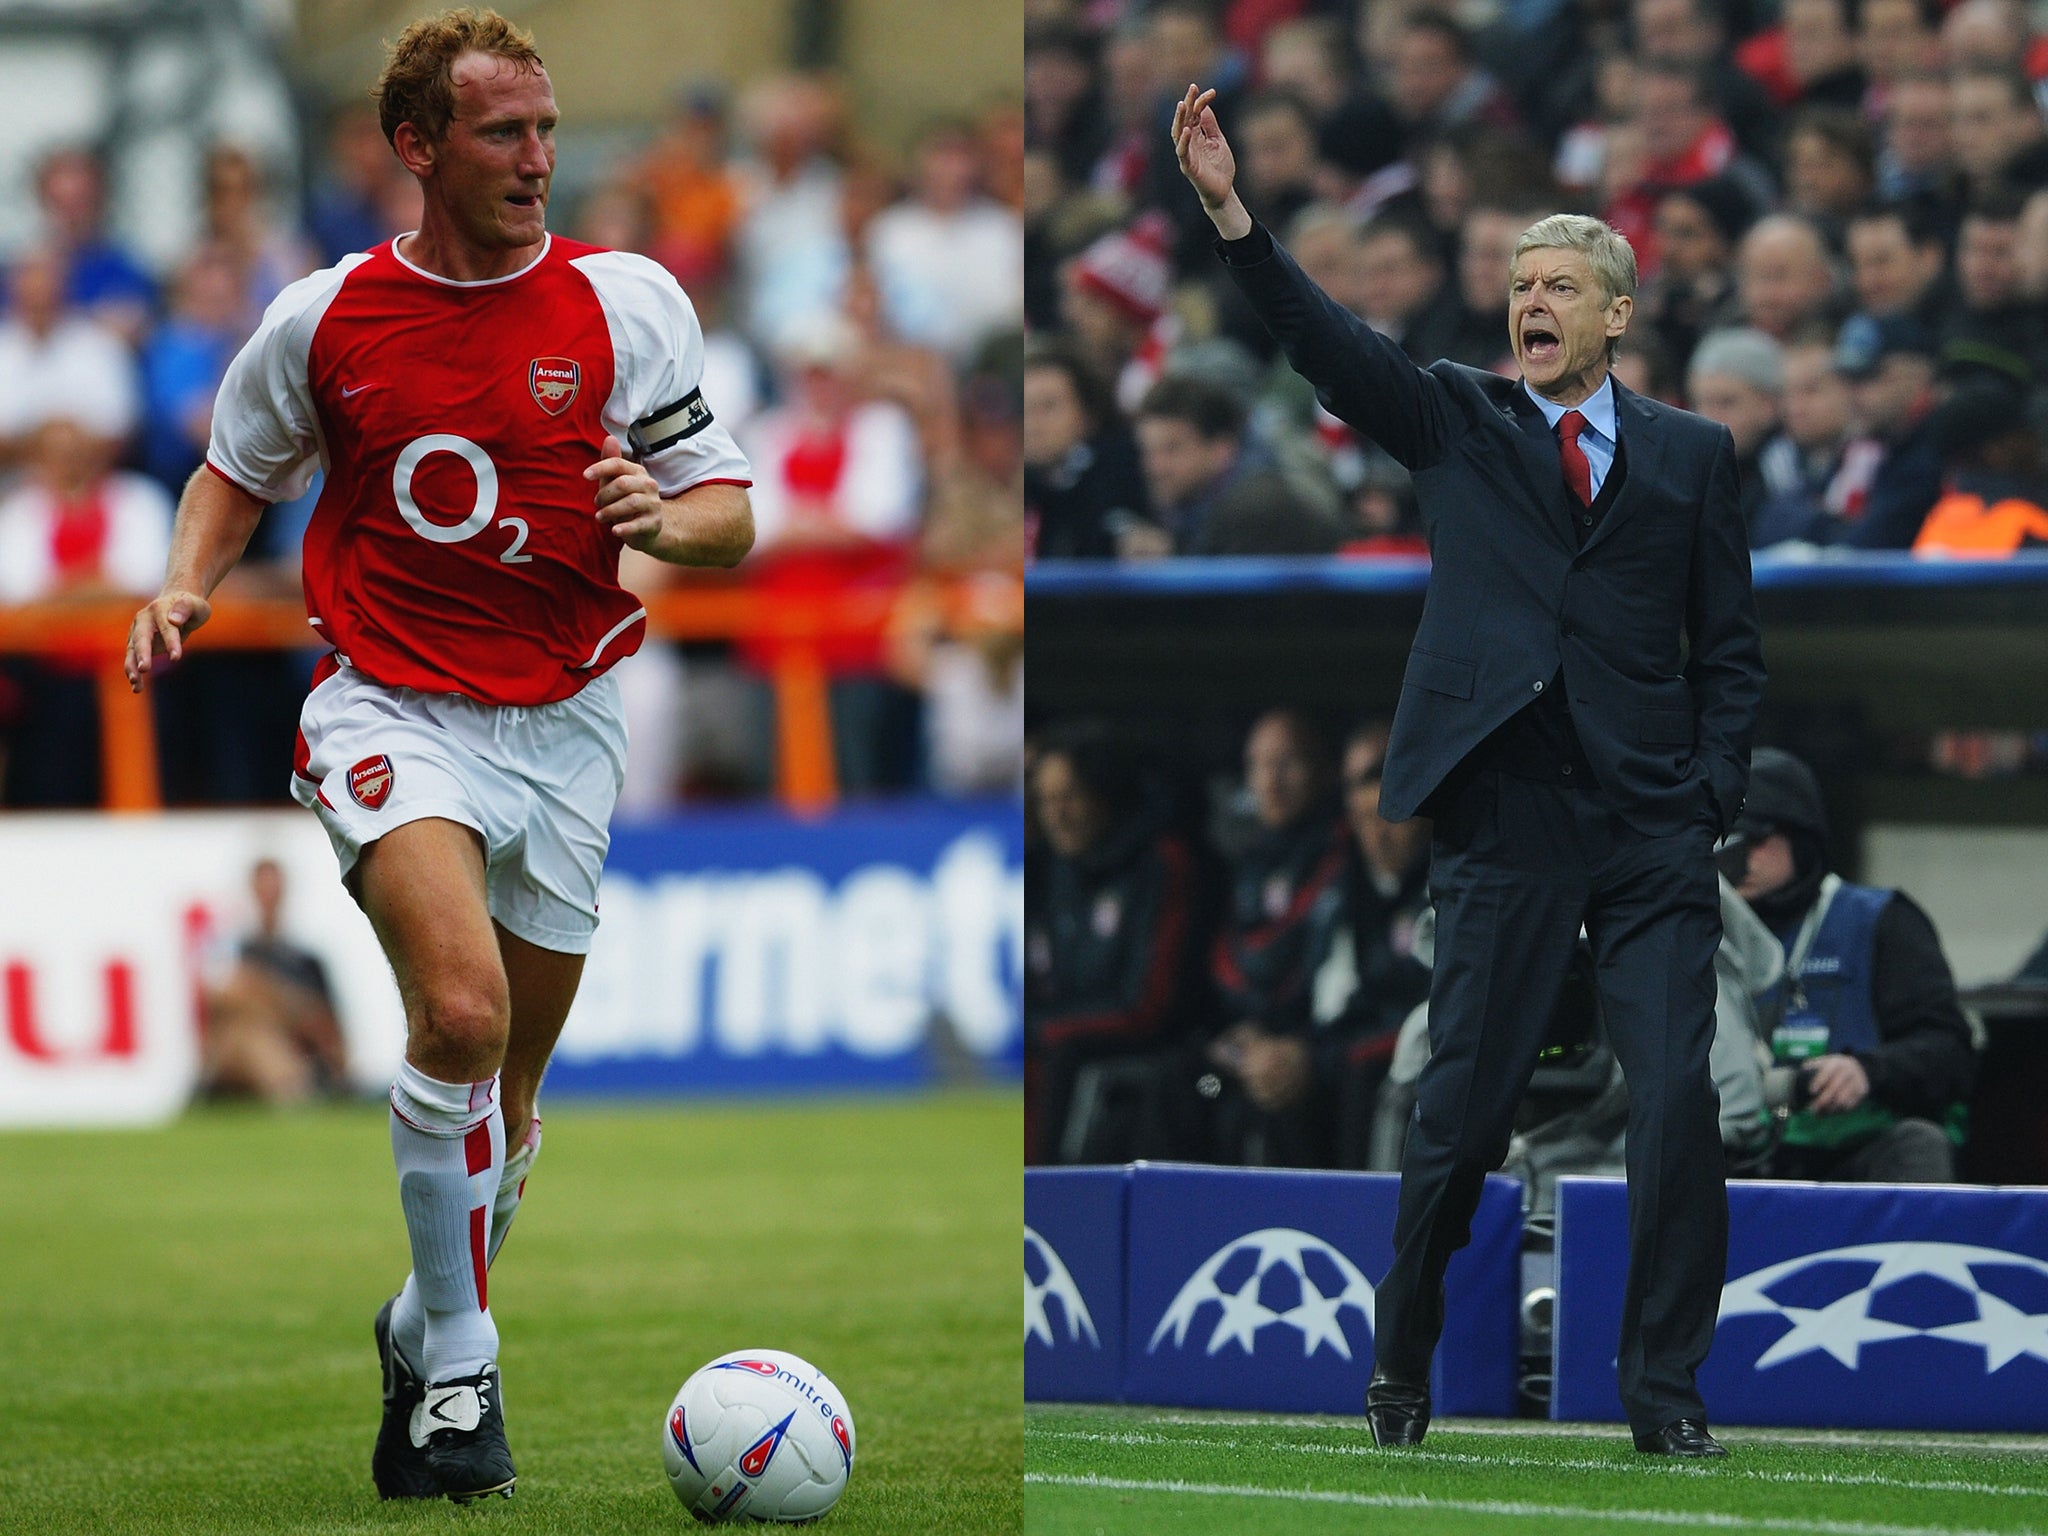 Ray Parlour has praised Arsenal manager Arsene Wenger for taking his game on to another level